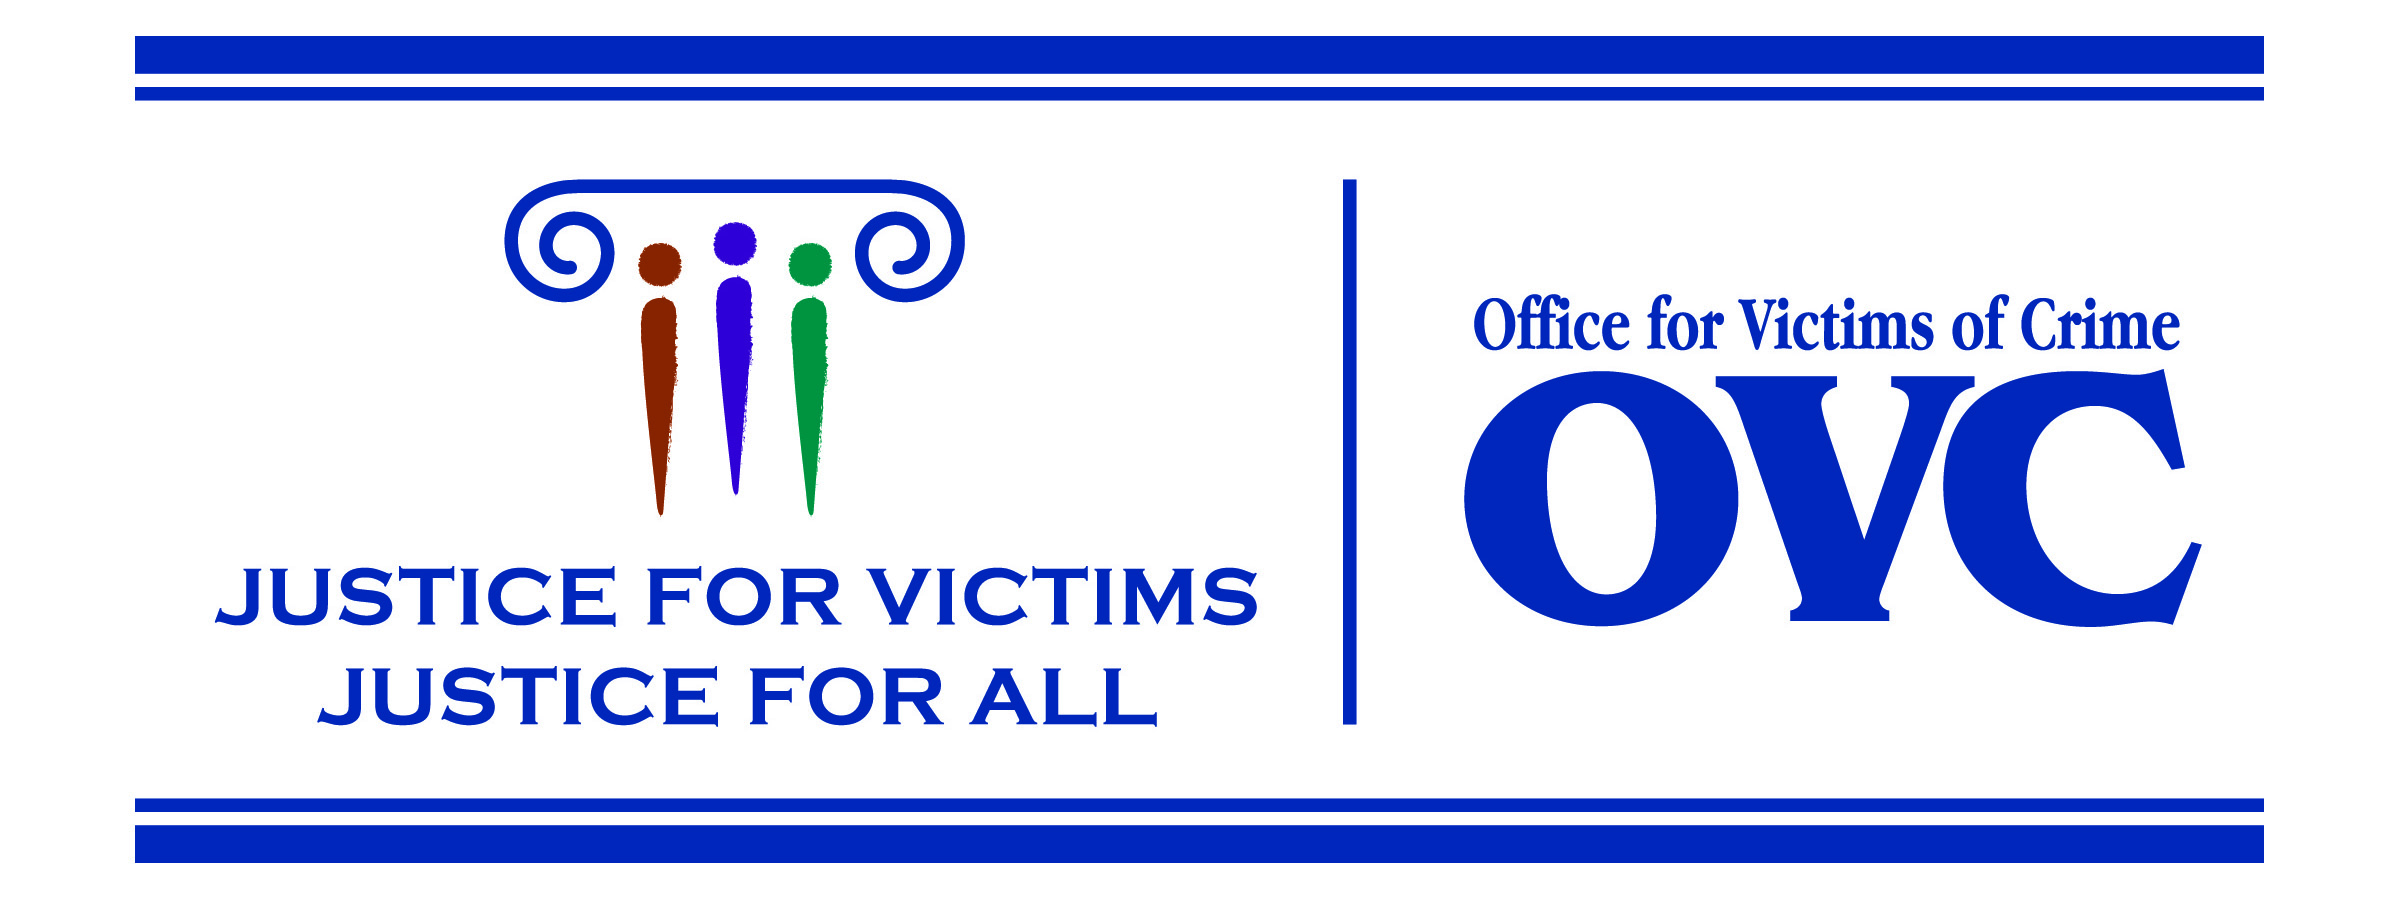 Office of Victims of Crime Services